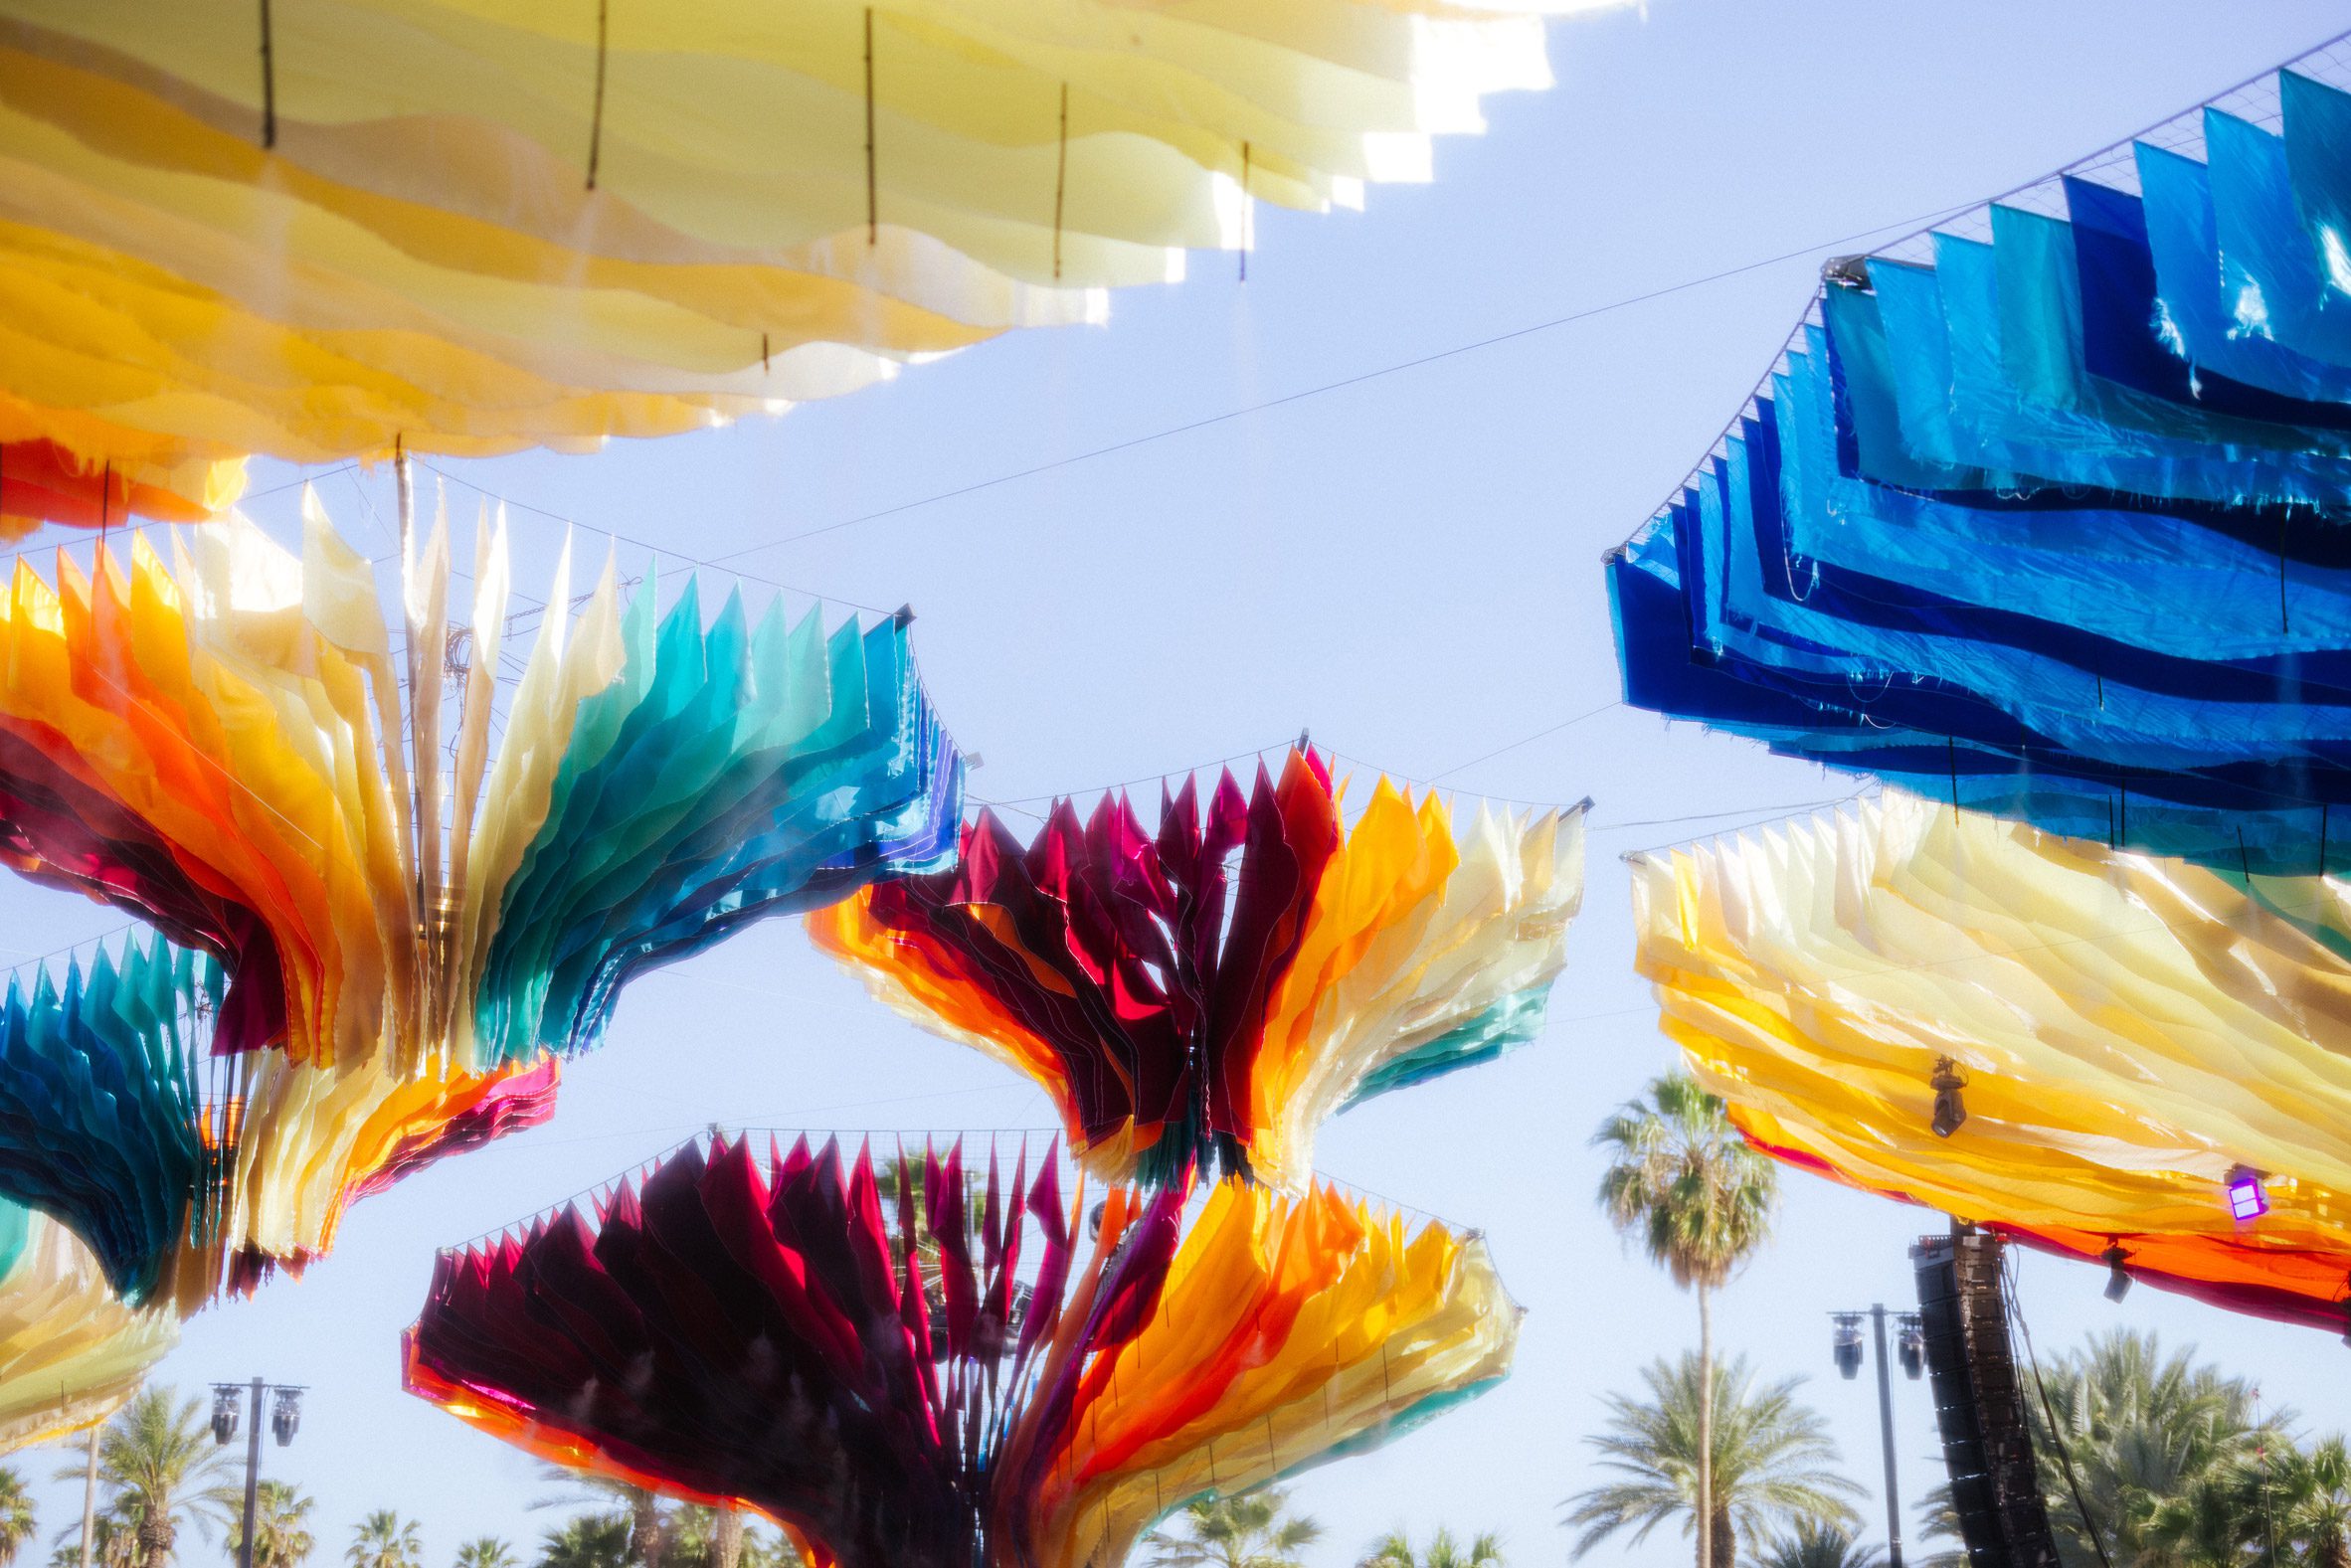 Floating fabric installations for Coachella